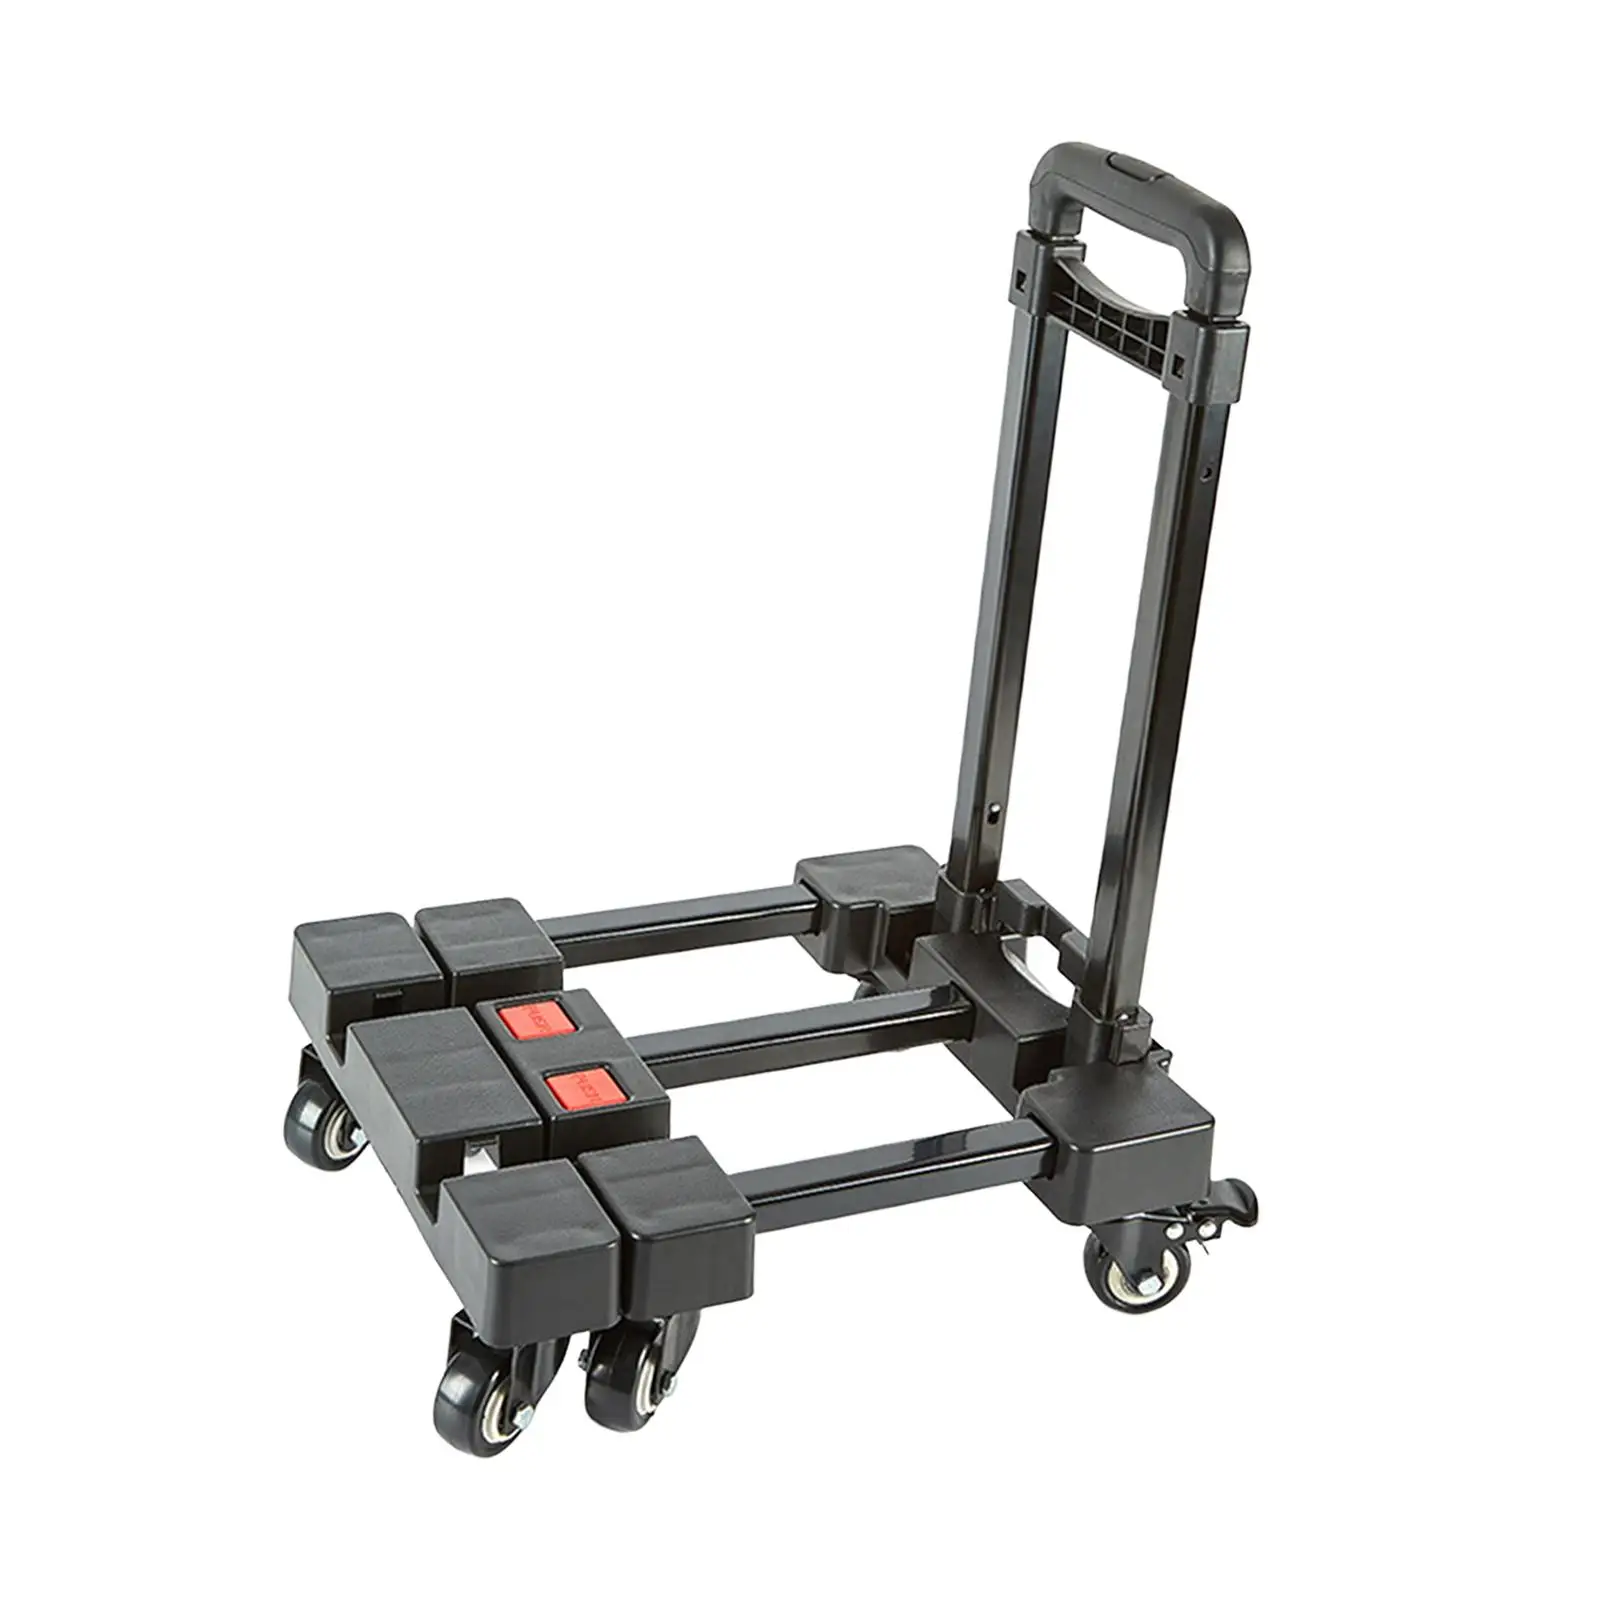 Folding Hand Truck Sturdy Collapsible Compact Luggage Trolley for Moving Outdoor Houshold Warehouse 100kg (220lb) Load Capacity